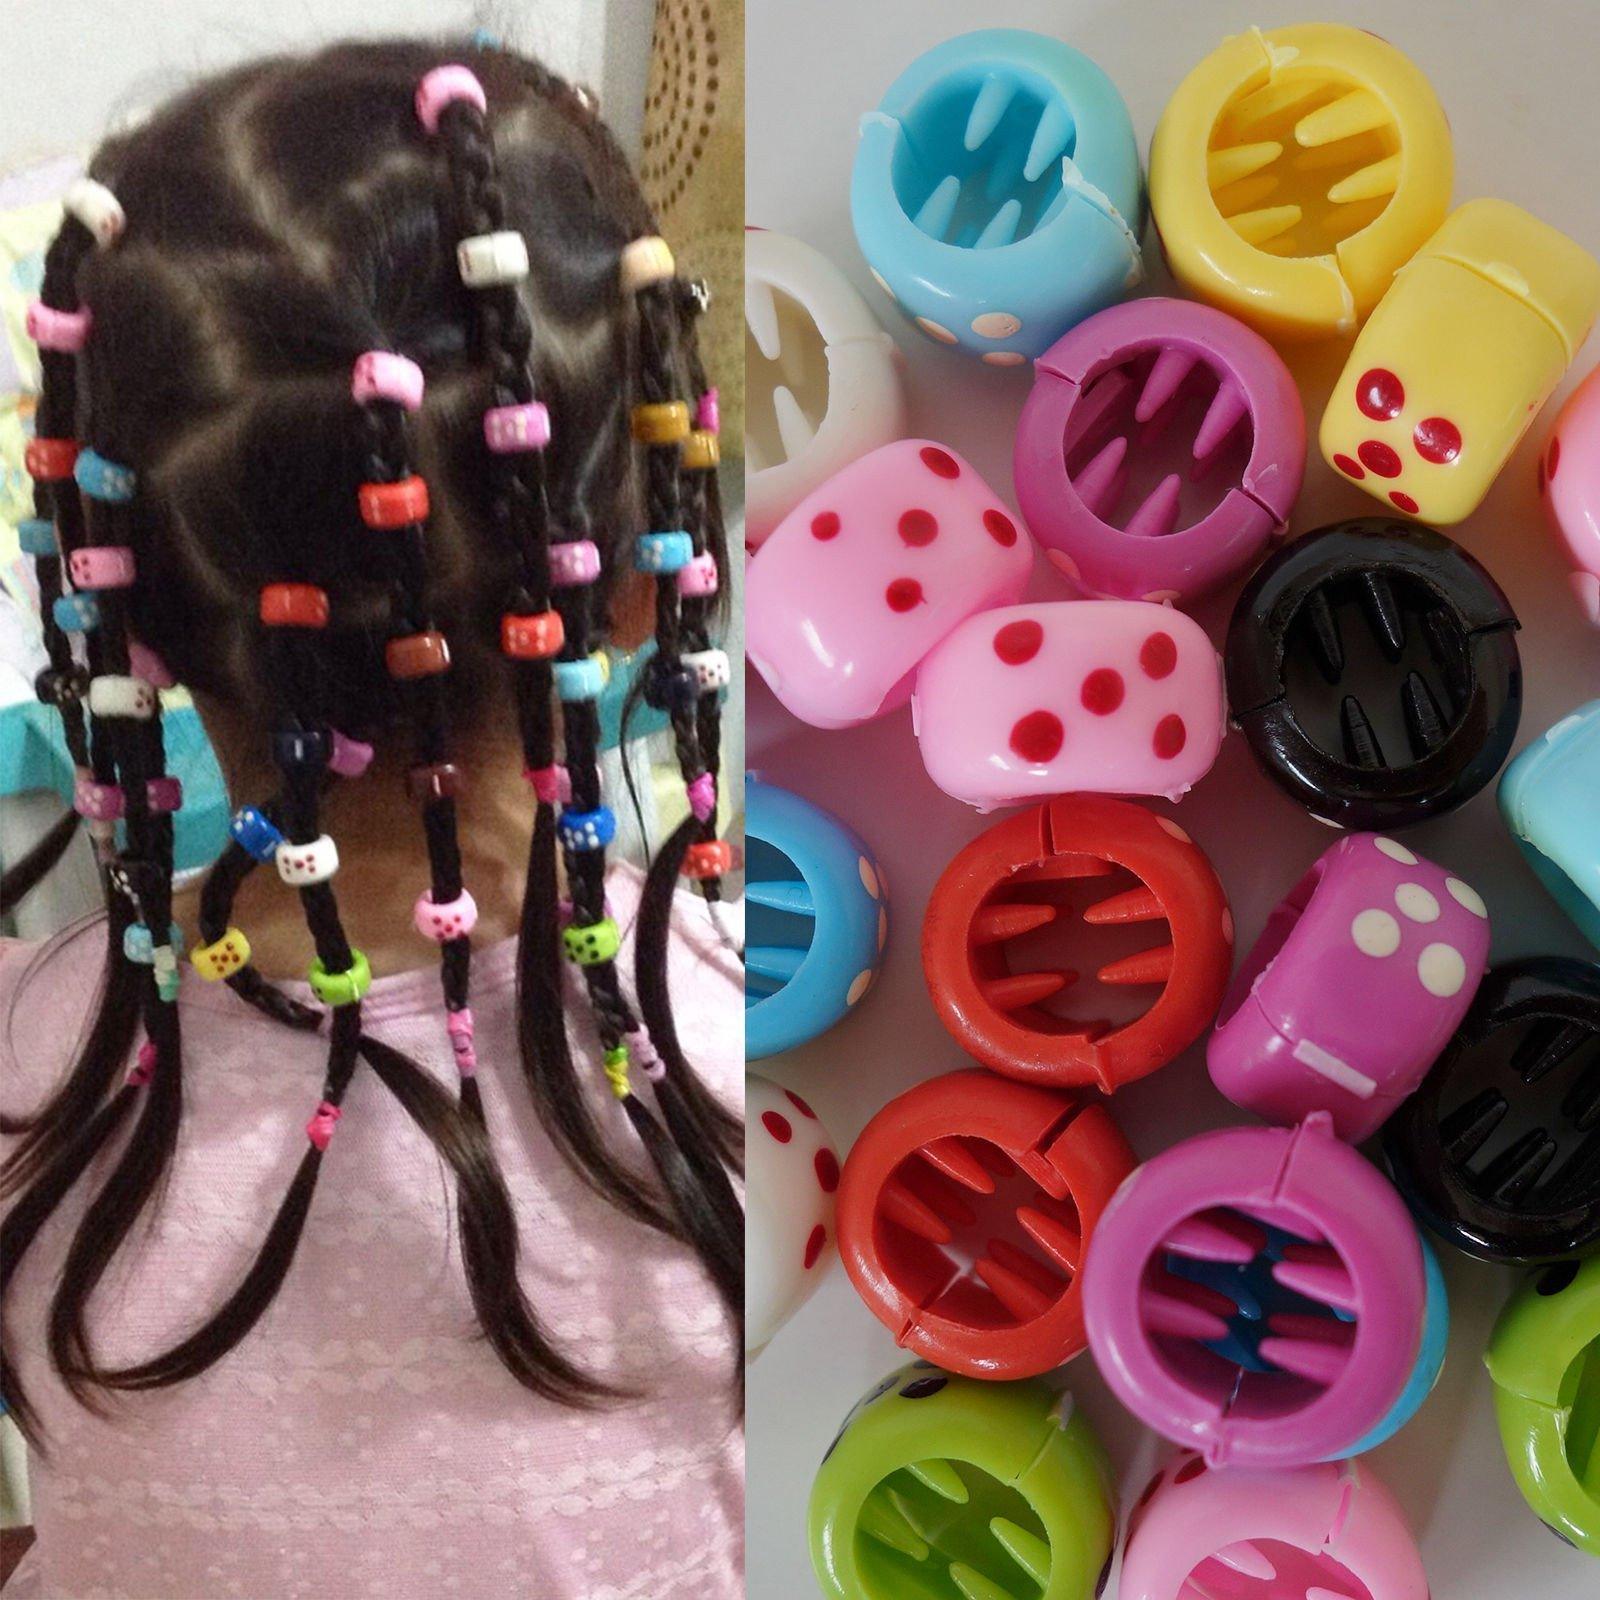 Mixed Colour Ponytail Hair Braiding Beads Clips Claw Grips Pony Tail Plait Braid